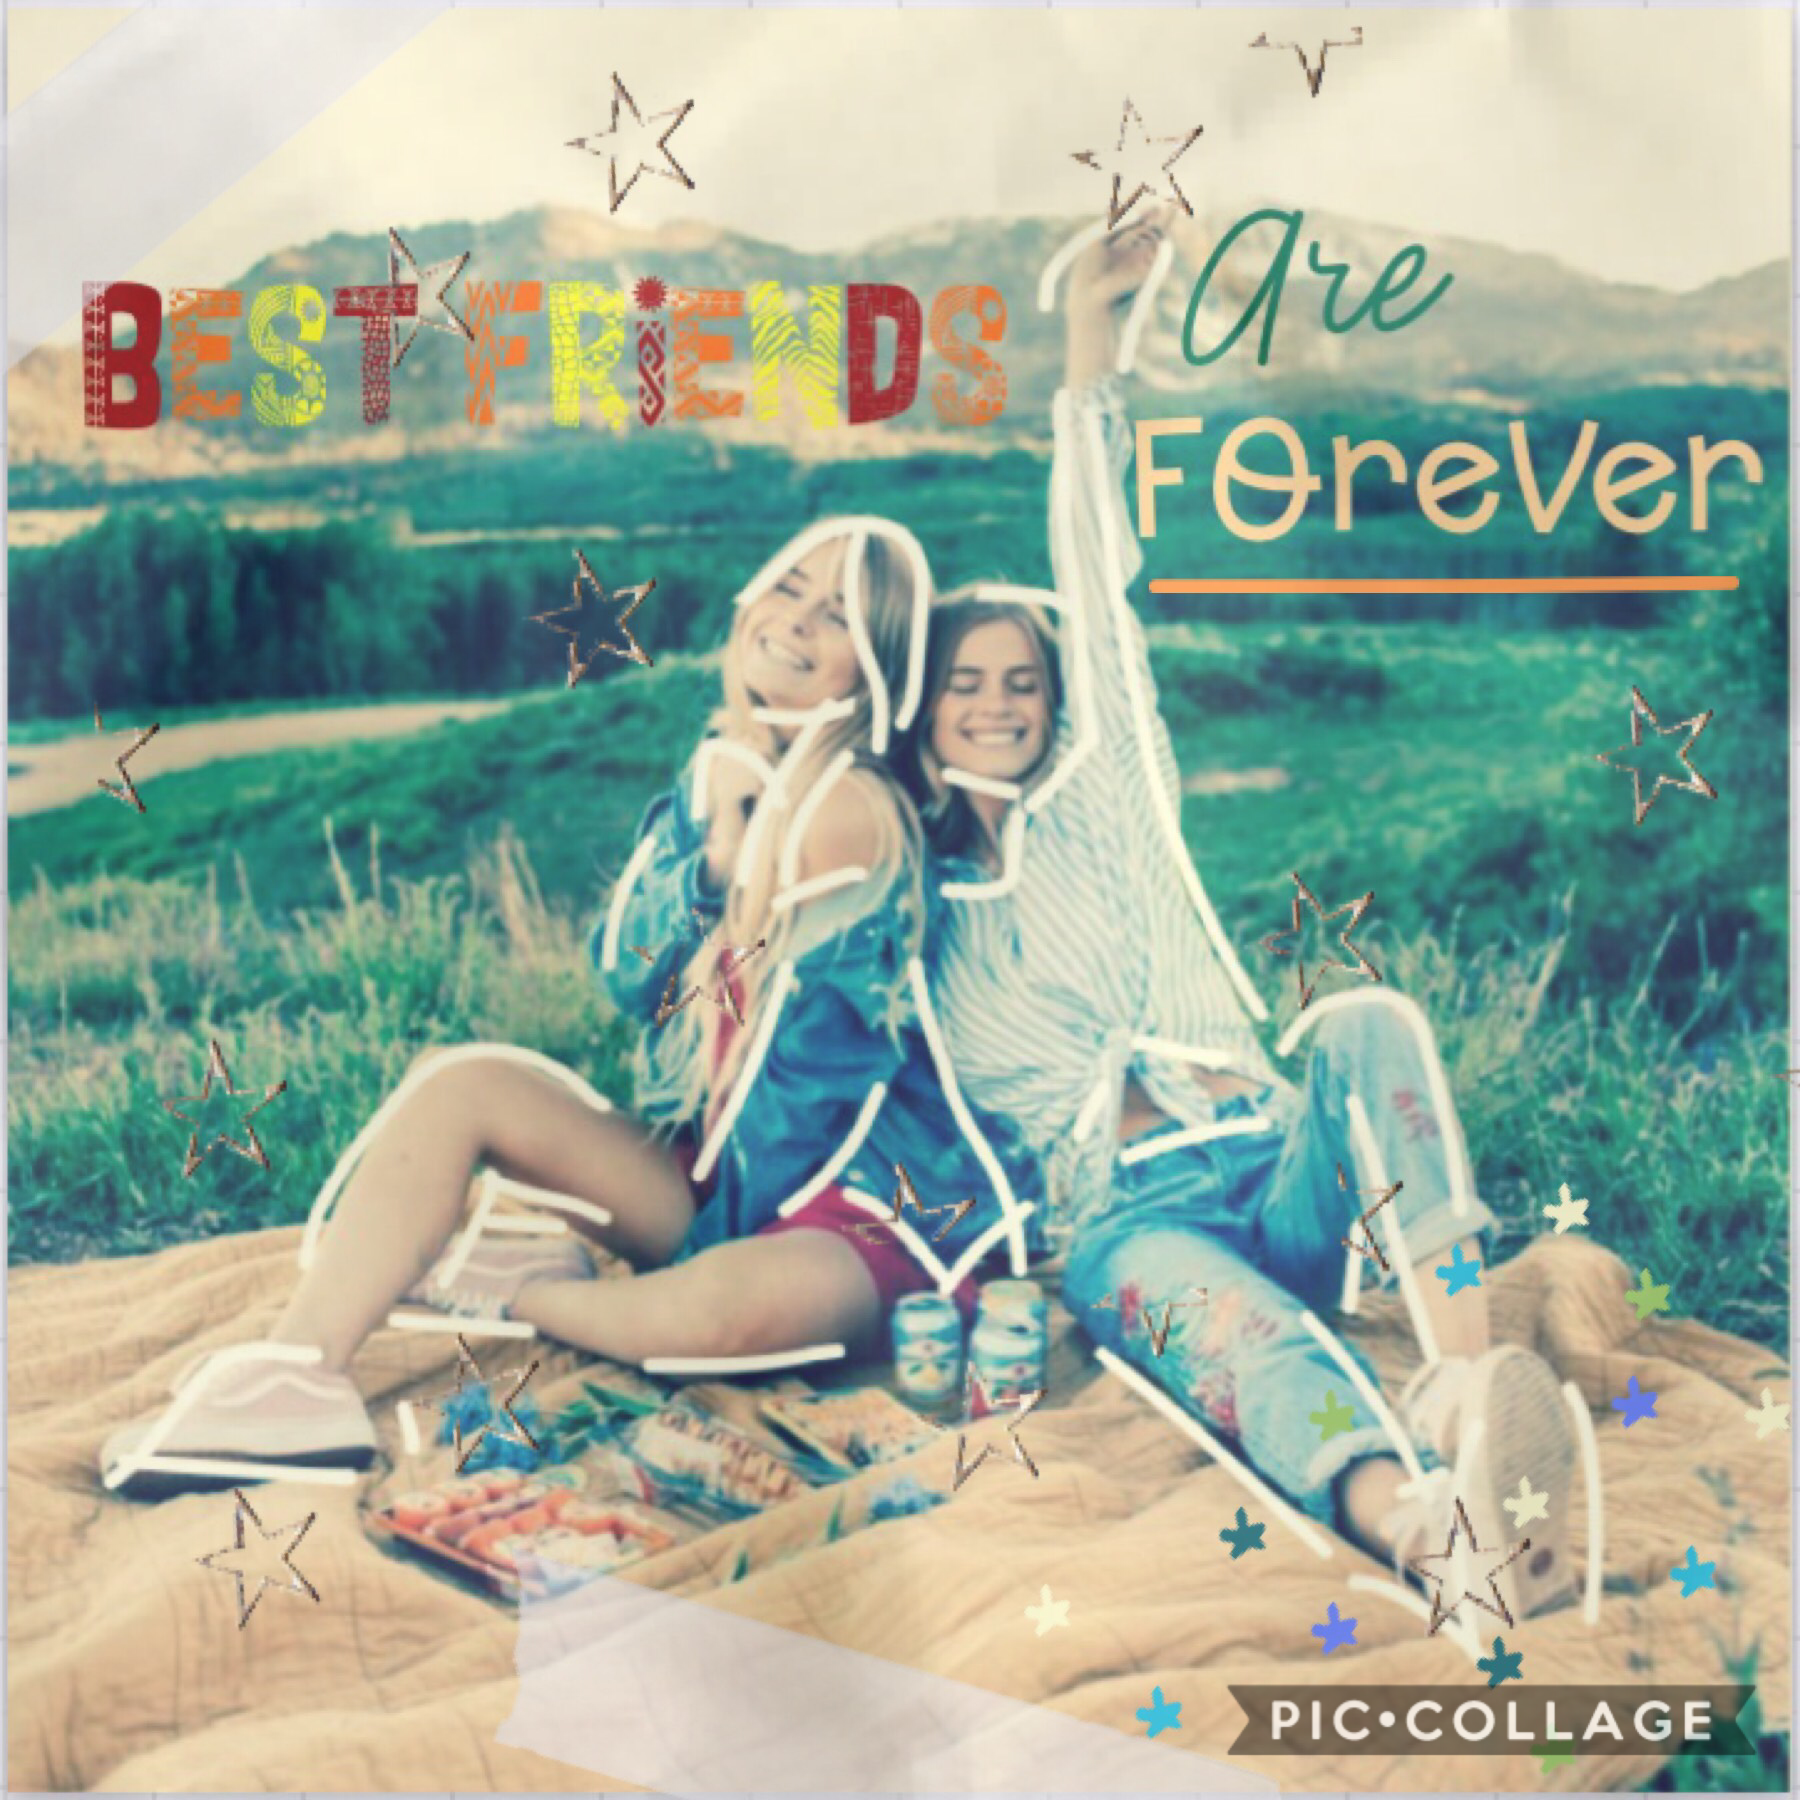 ❤️tap❤️


‘Best friends are forever’

Hi! Having a good day? This was my first time using fonts from outside of pc! How do you like it? Last day of school today 🥳 thanks again for 600 followers!